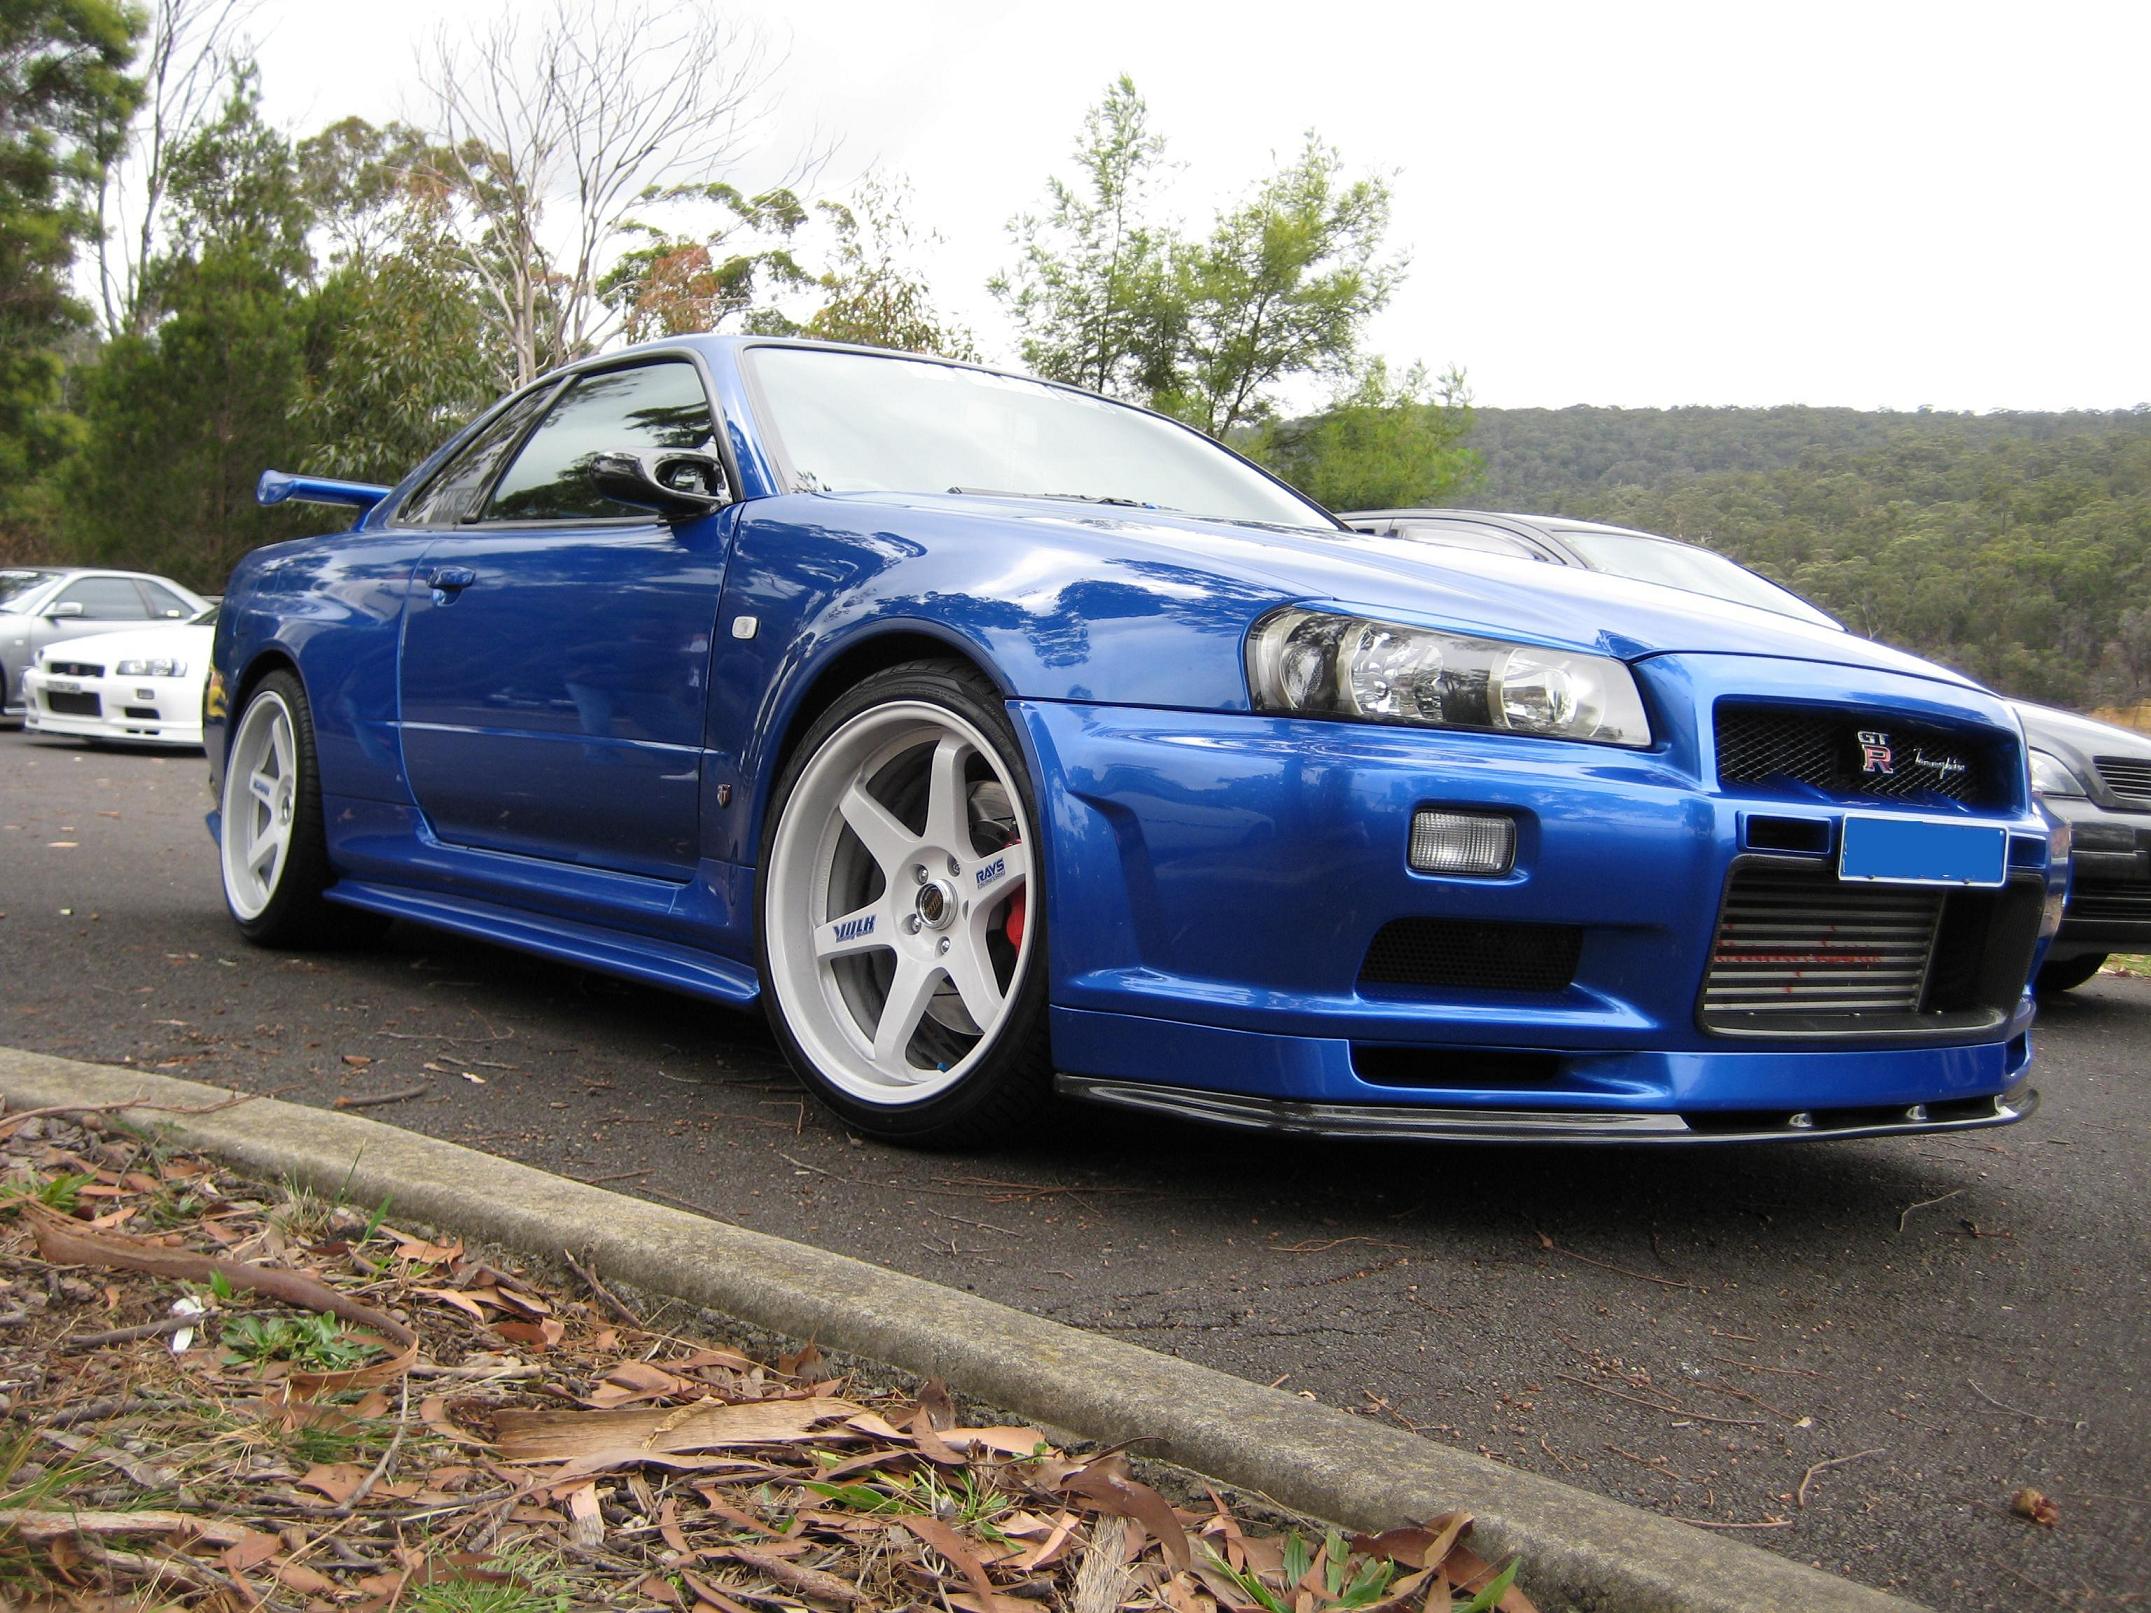 Tommy Kaira R34 Gt-r - For Sale (Private Whole cars only) - SAU Community